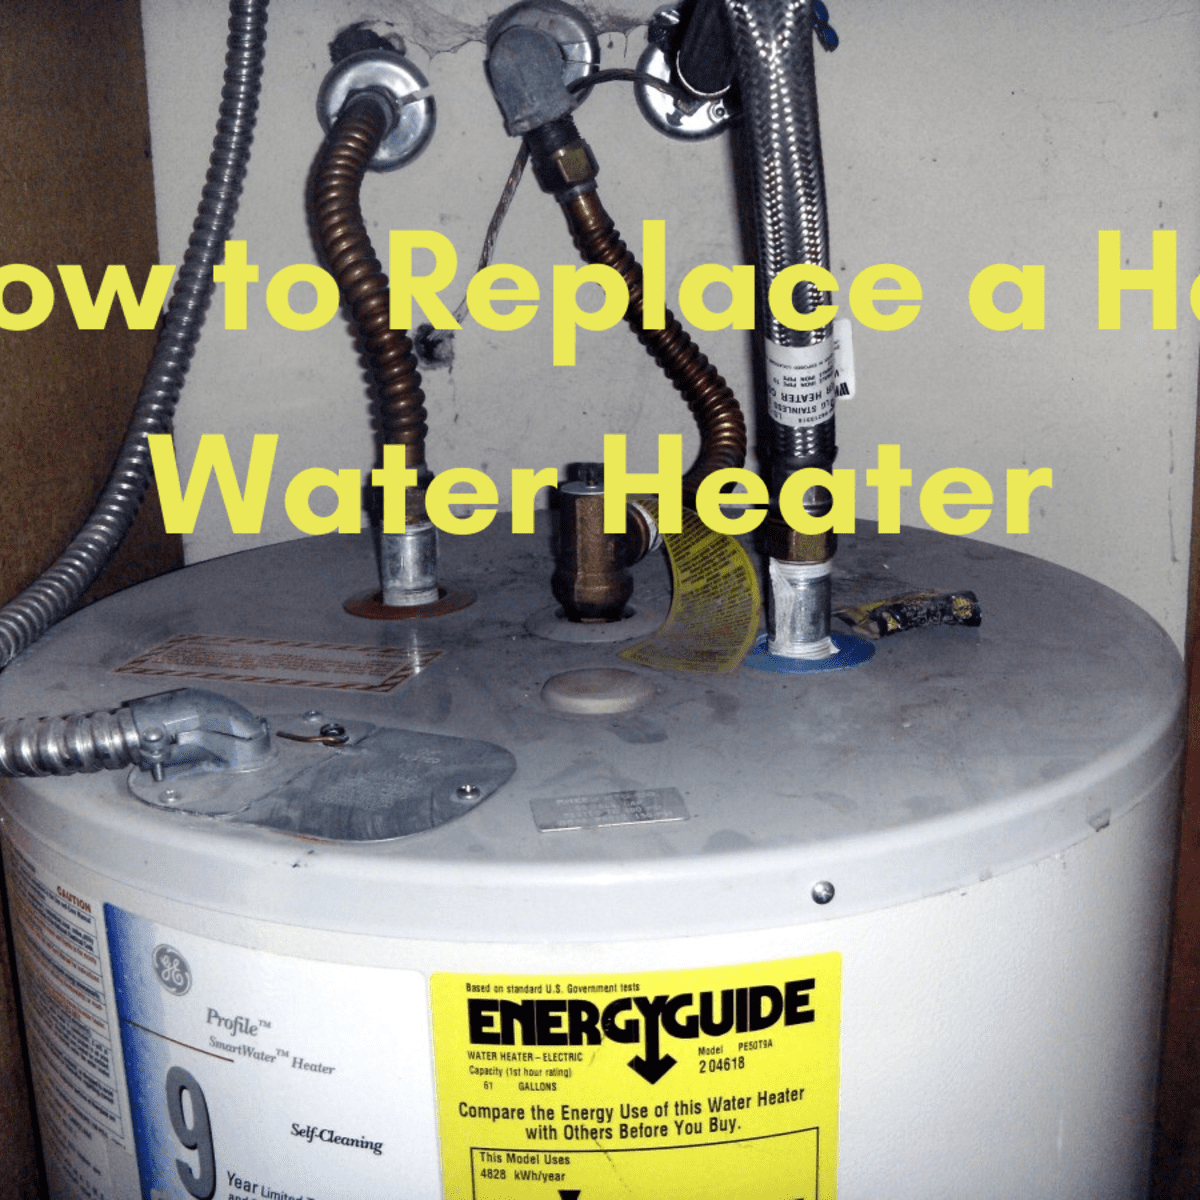 https://images.saymedia-content.com/.image/ar_1:1%2Cc_fill%2Ccs_srgb%2Cq_auto:eco%2Cw_1200/MTg3NzM4NDI2Nzk4MjUzMzEx/how-to-replace-a-hot-water-heater.png